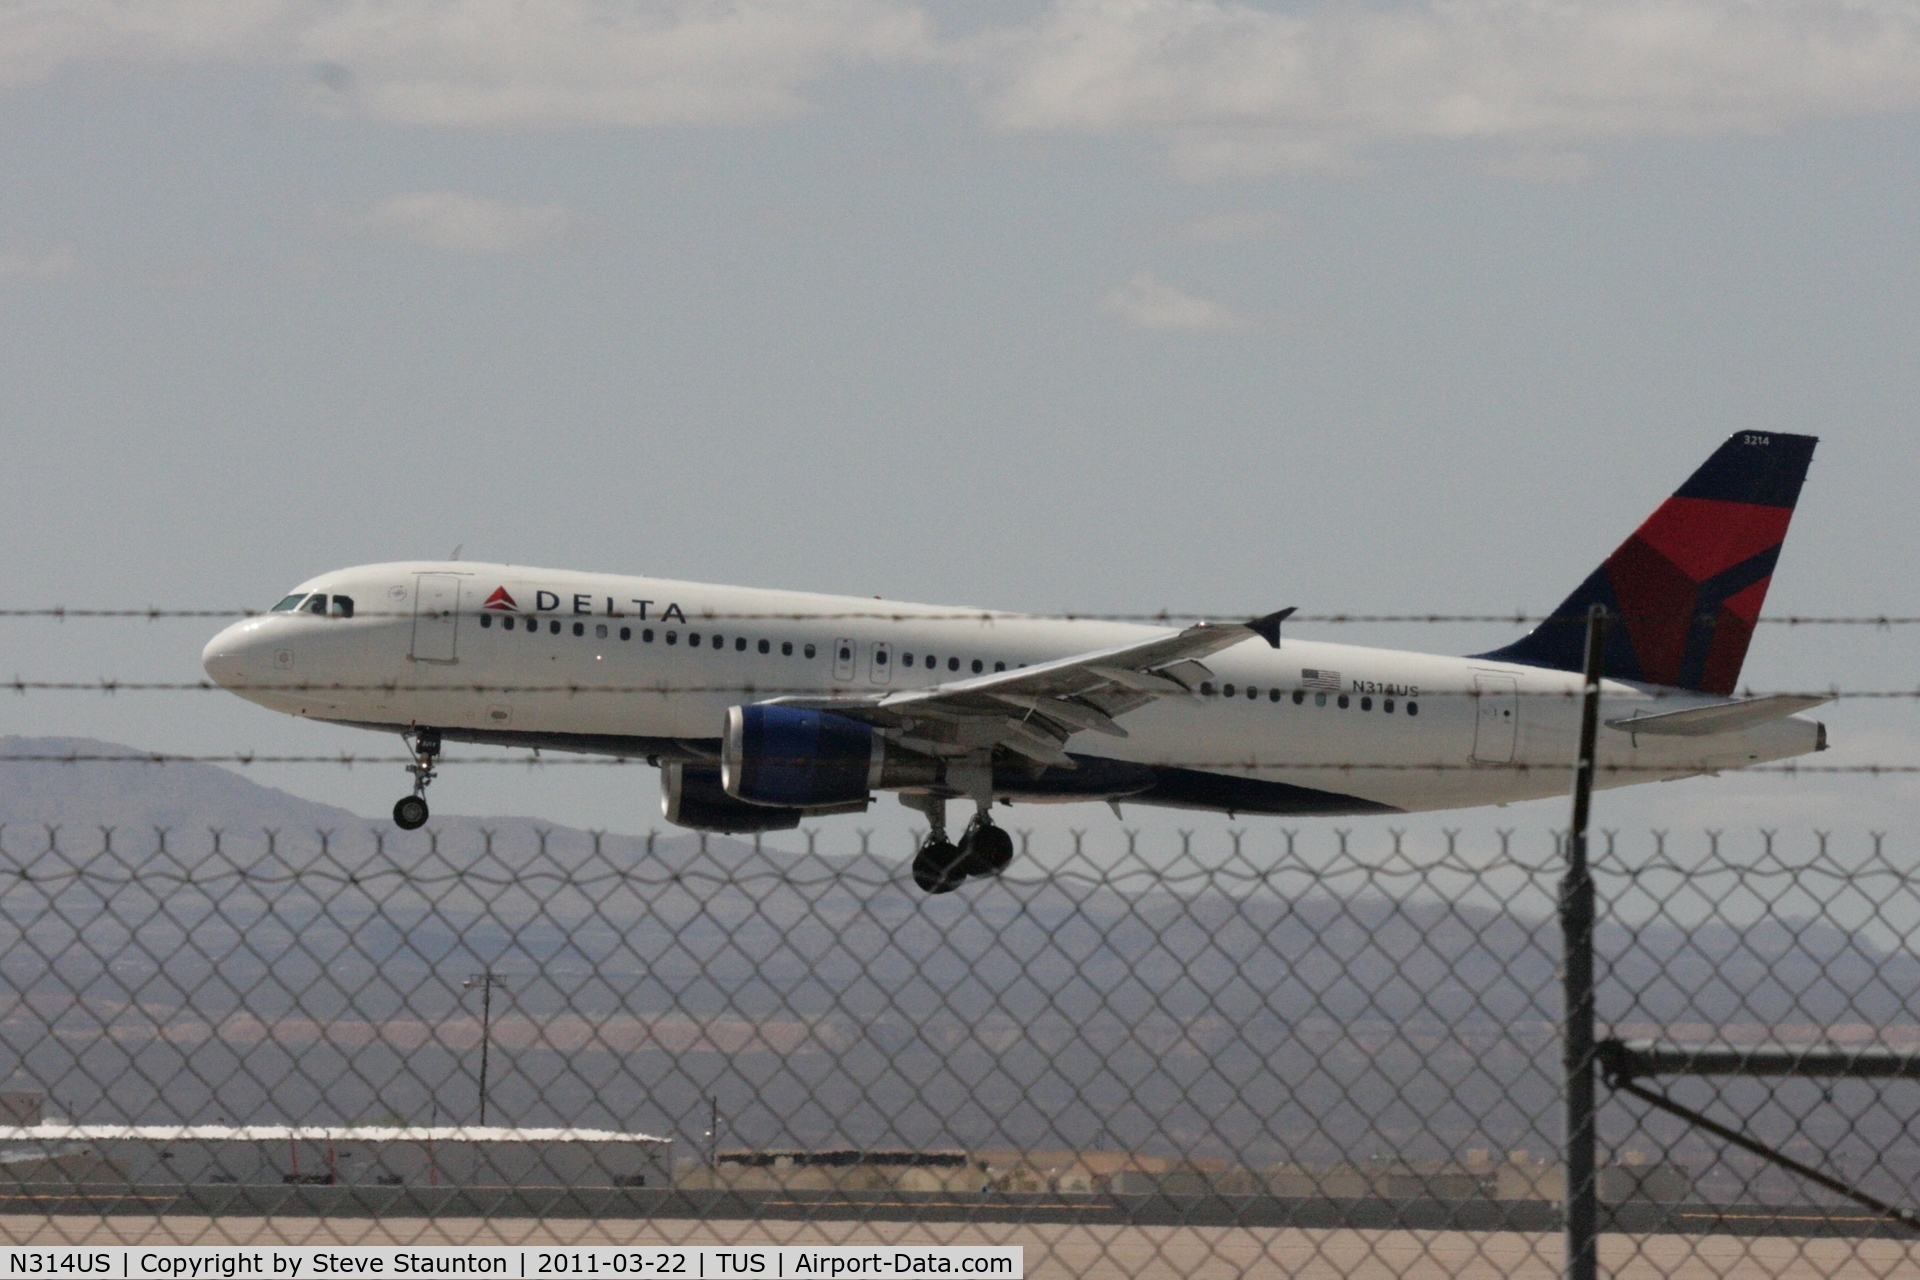 N314US, 1991 Airbus A320-211 C/N 160, Taken at Tucson International Airport, in March 2011 whilst on an Aeroprint Aviation tour